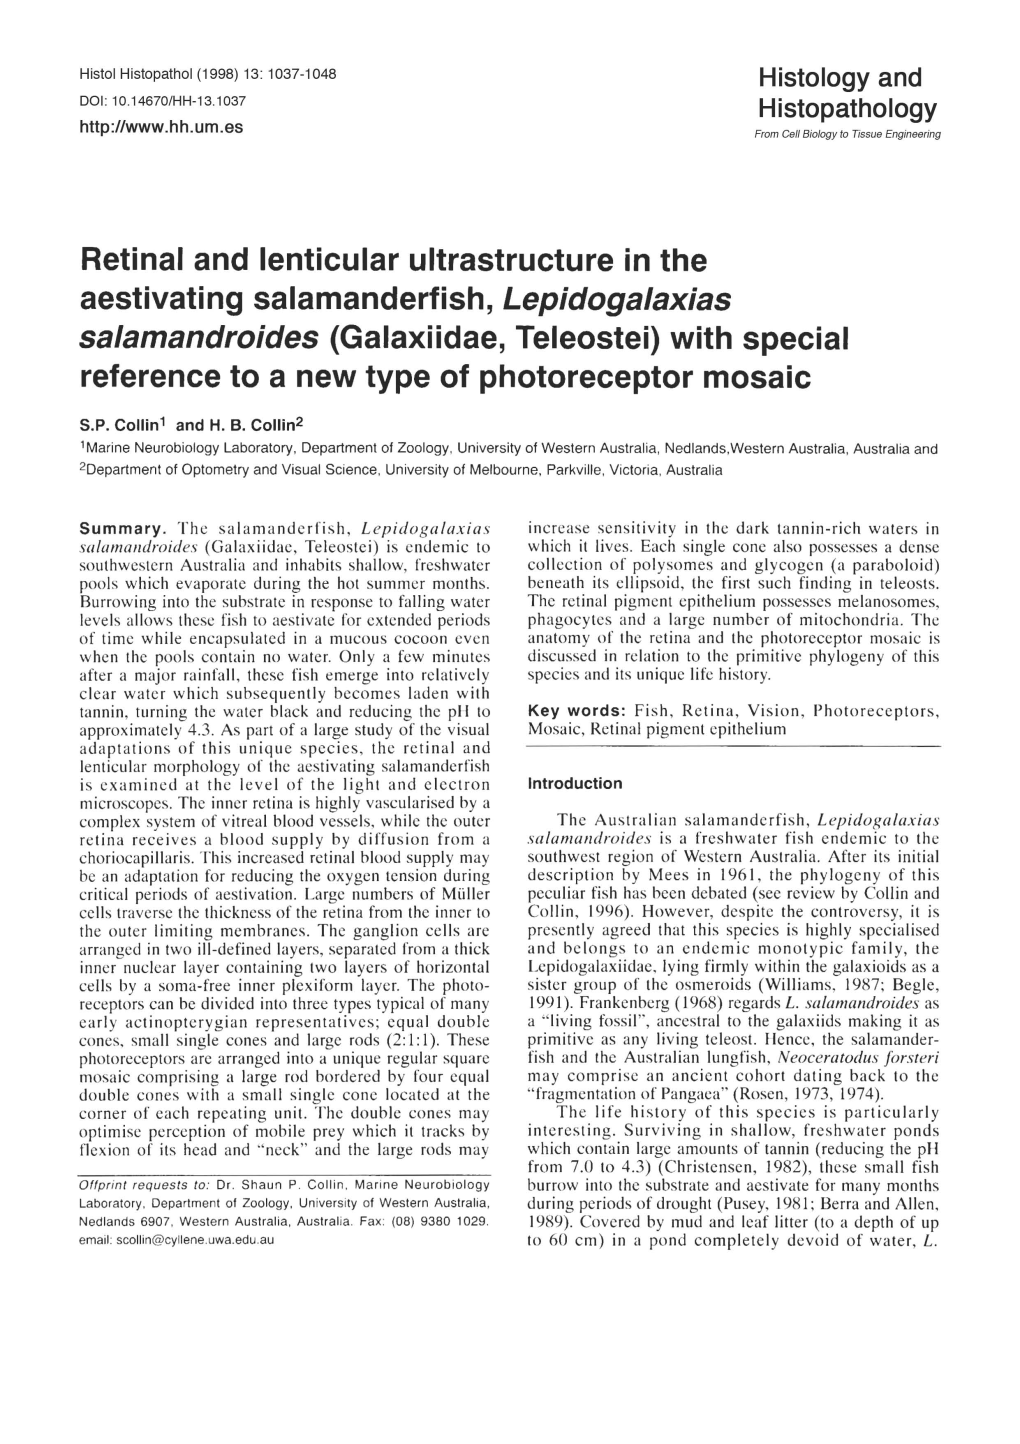 Retinal and Lenticular Ultrastructure in The